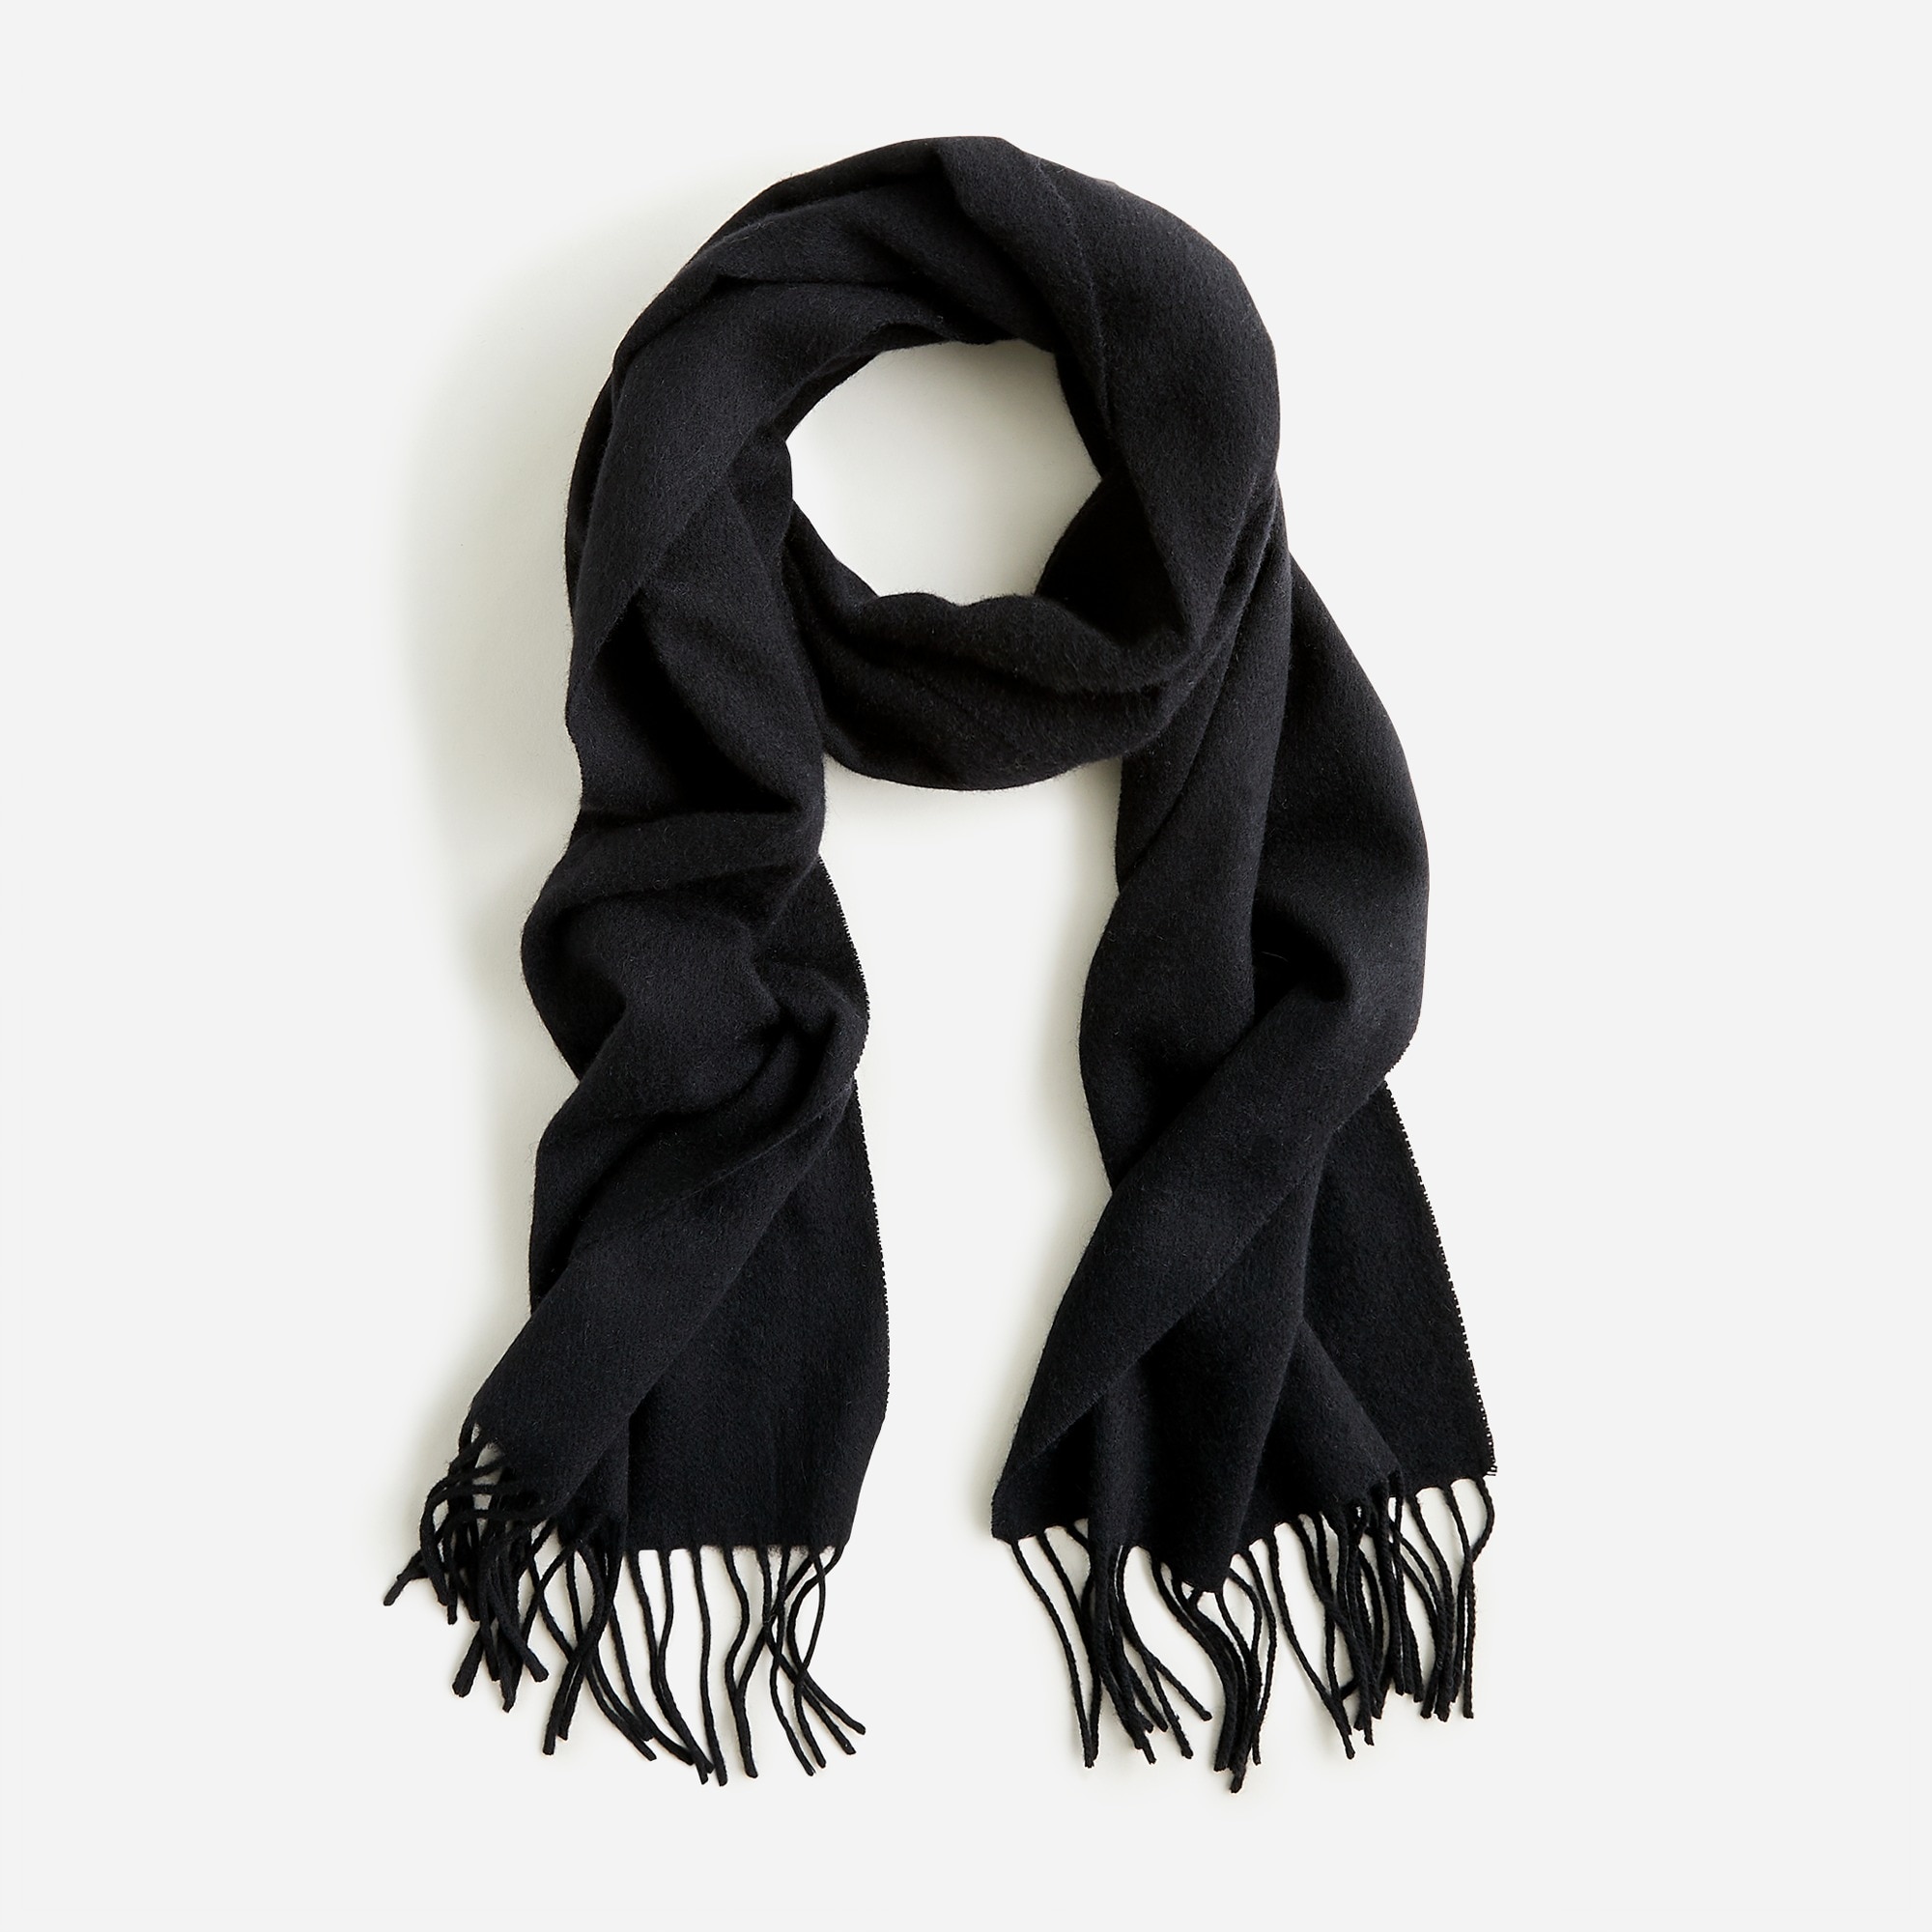  Solid cashmere scarf